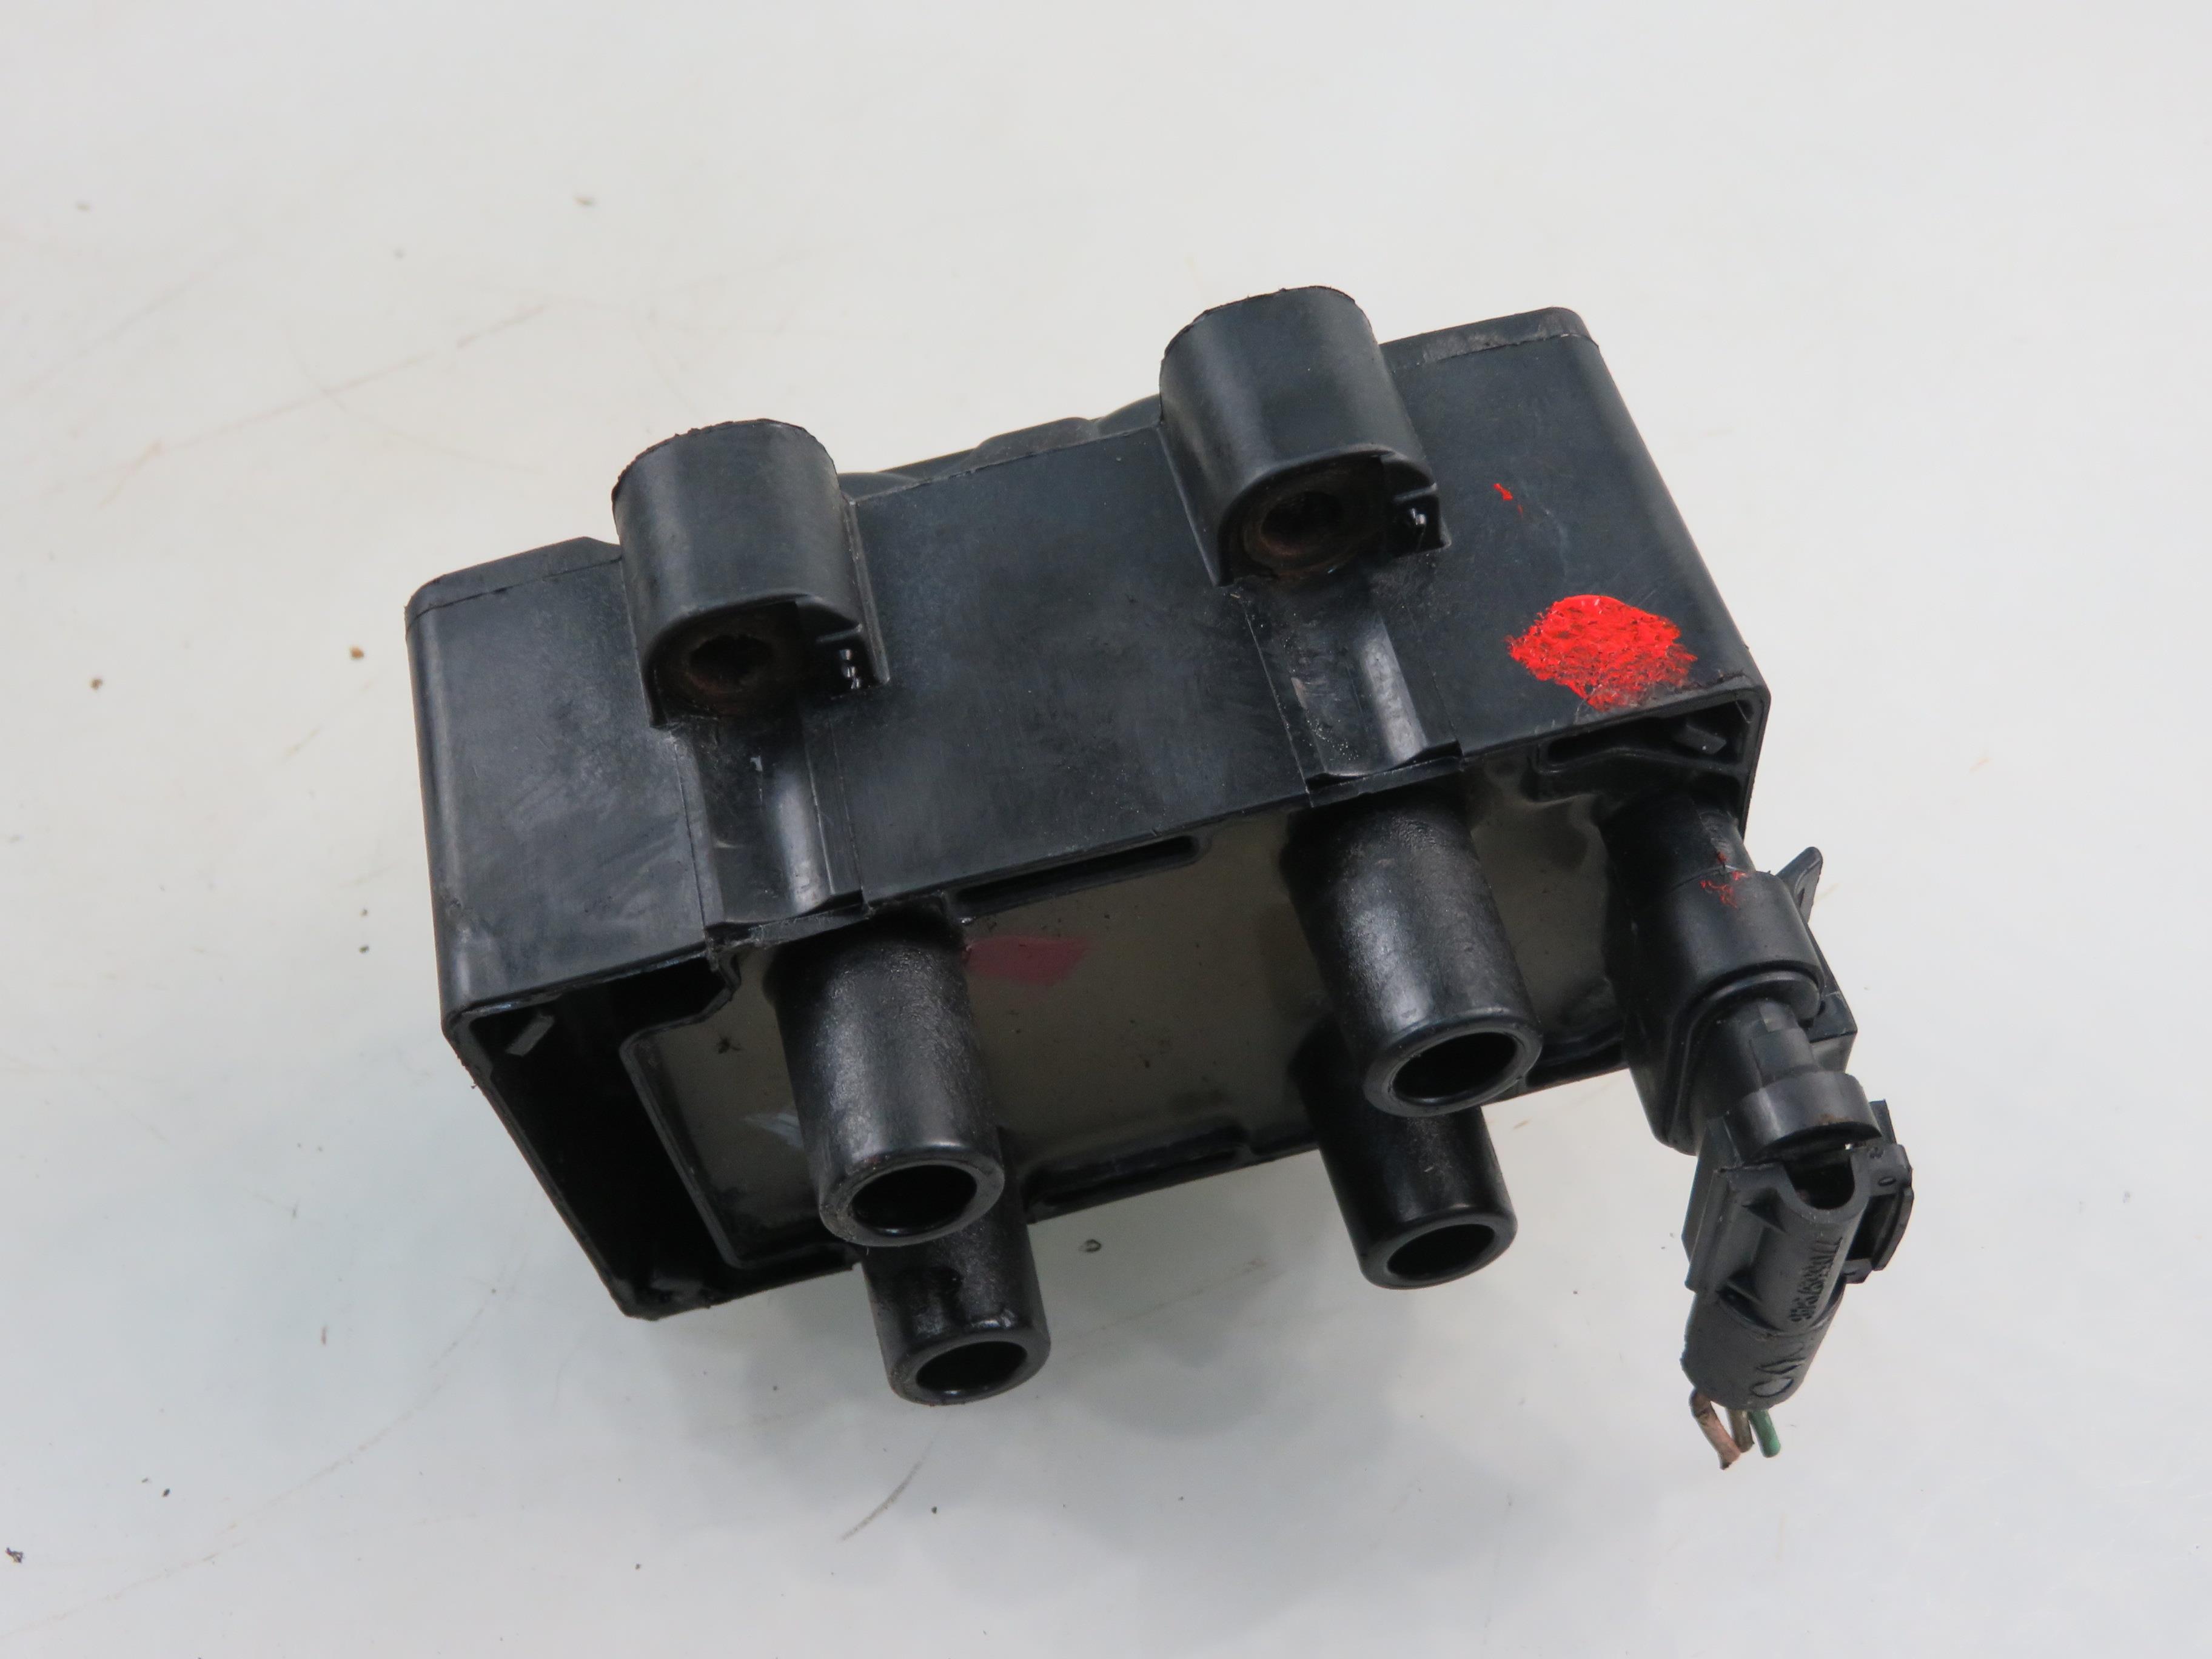 RENAULT Thalia 1 generation  (2002-2008) High Voltage Ignition Coil 7700274008, 7700873701, 2526151A 23926575